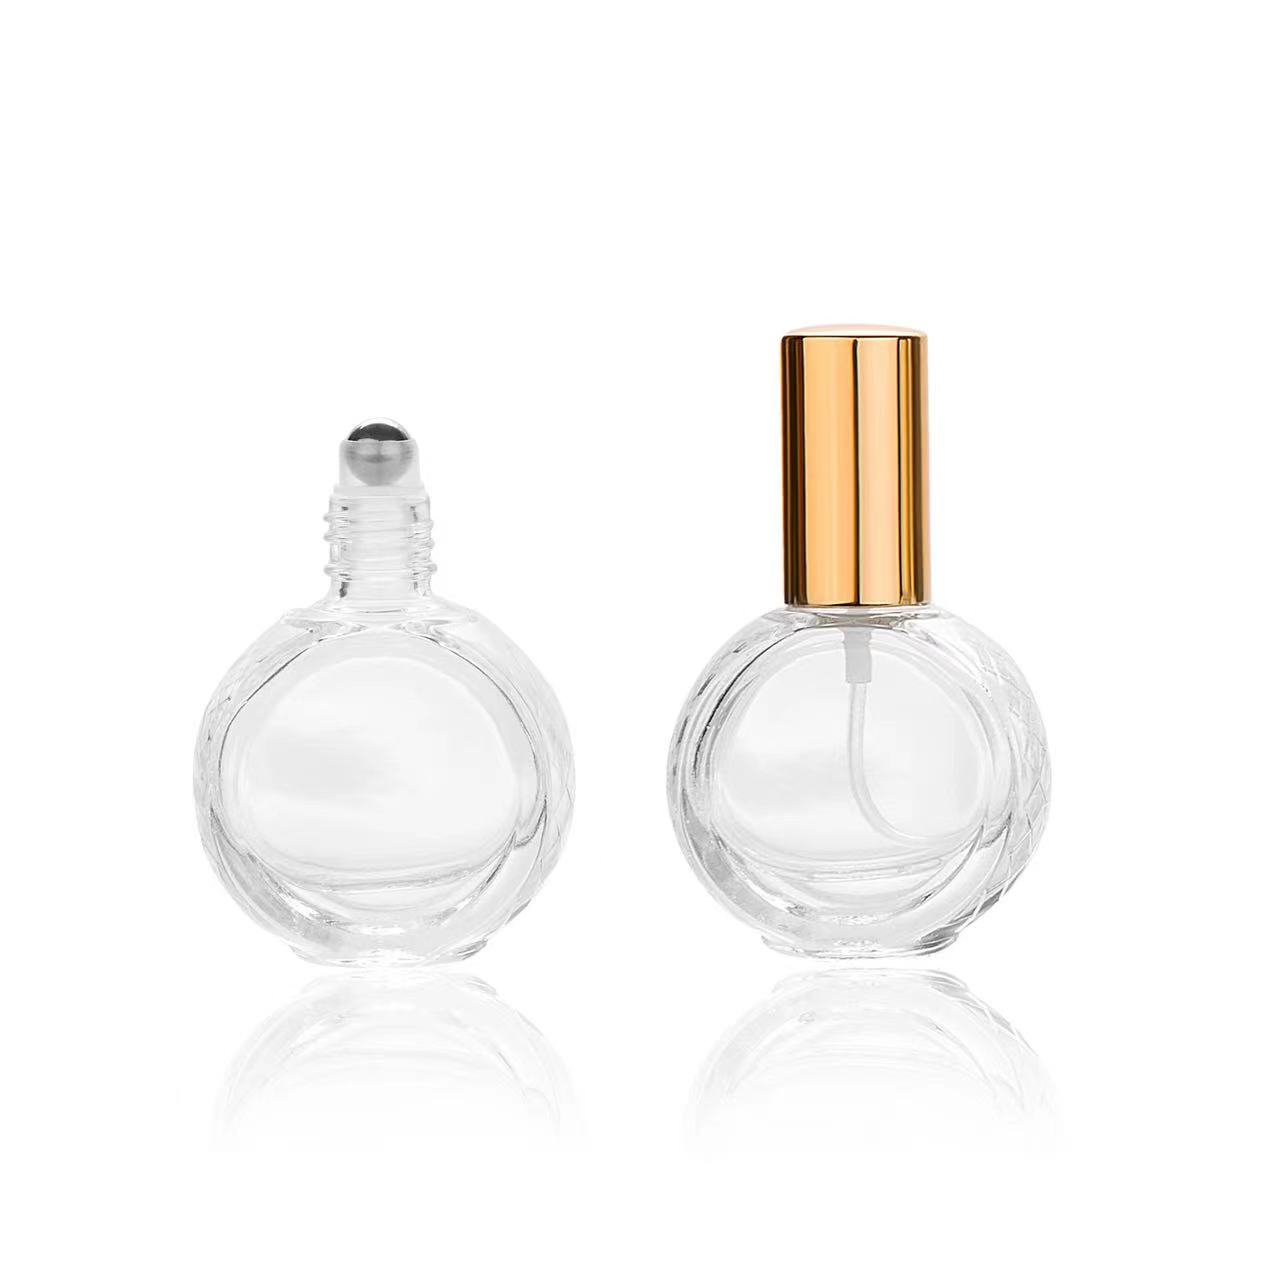 What are the types of ampoules?